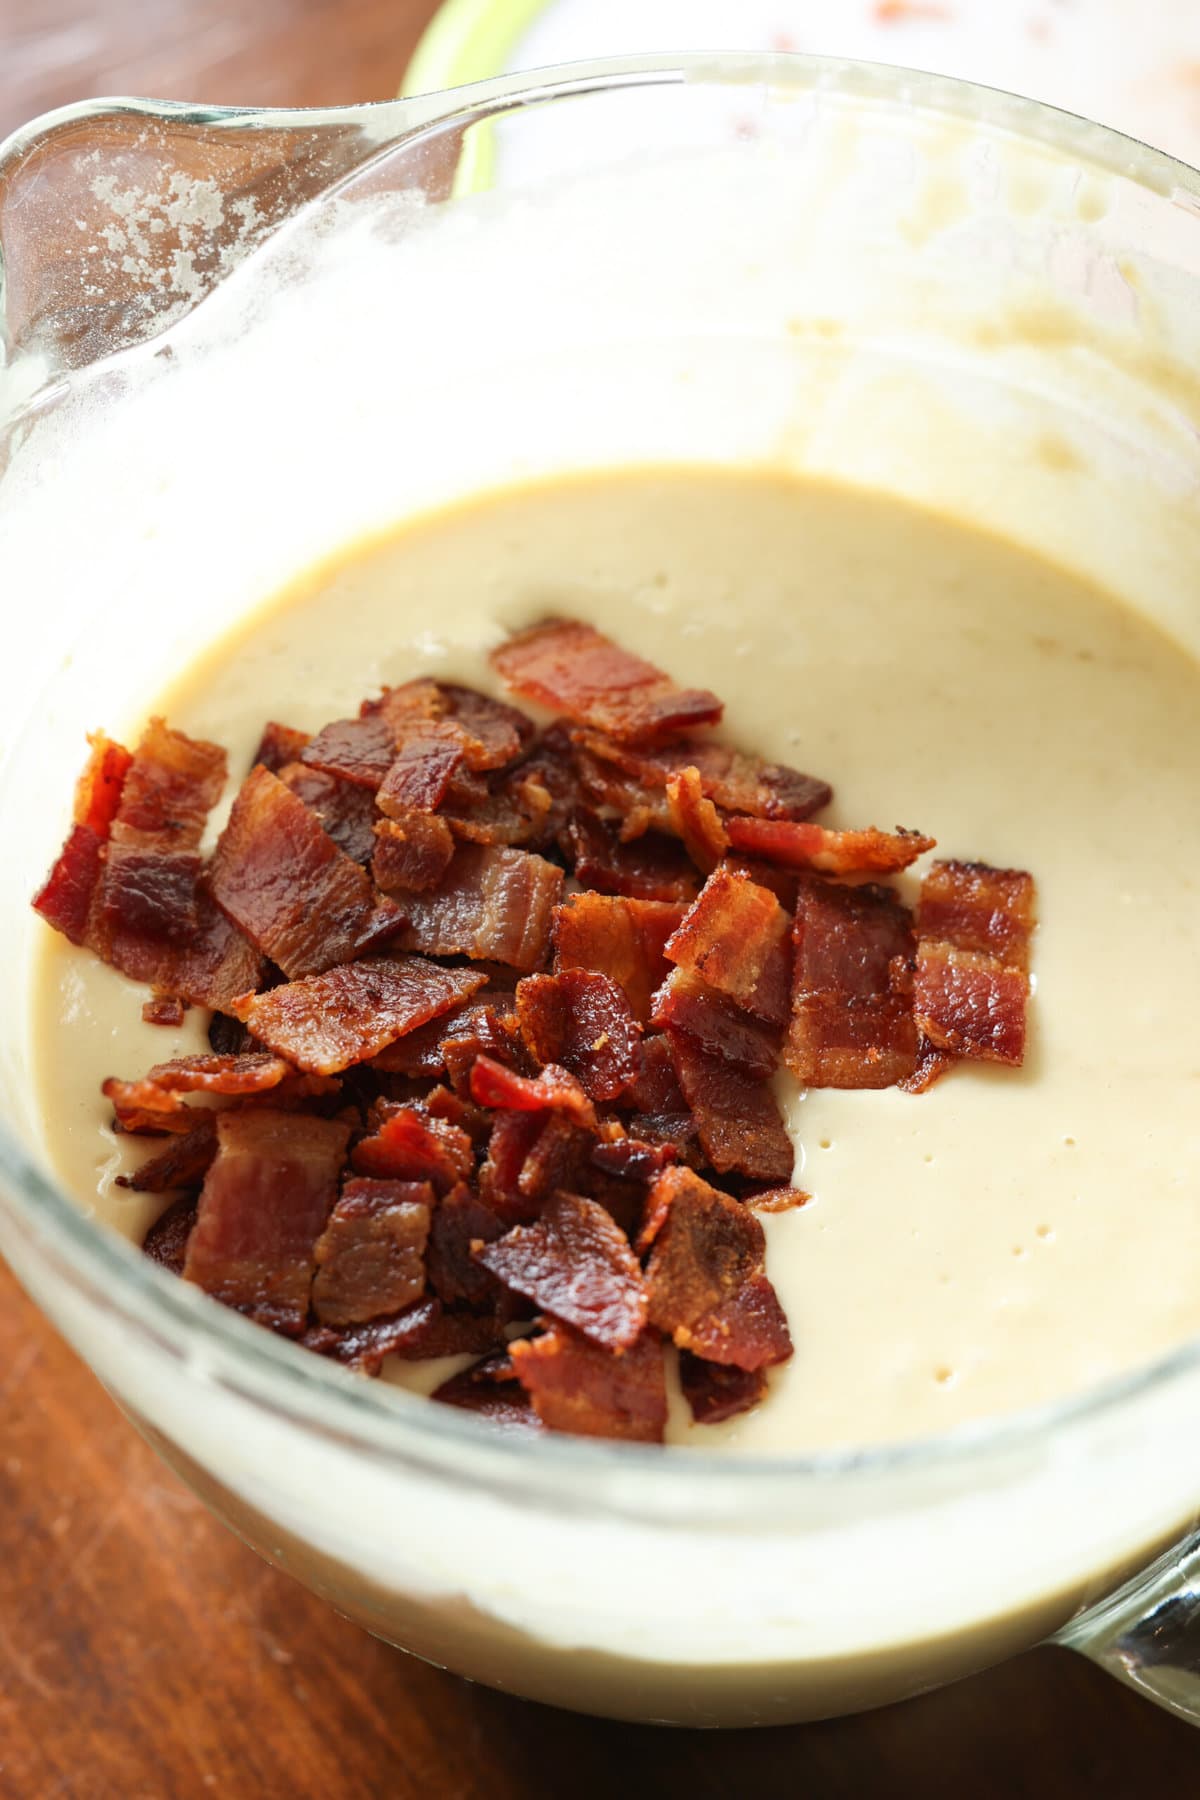 Pancake batter and chopped bacon in a clear glass bowl